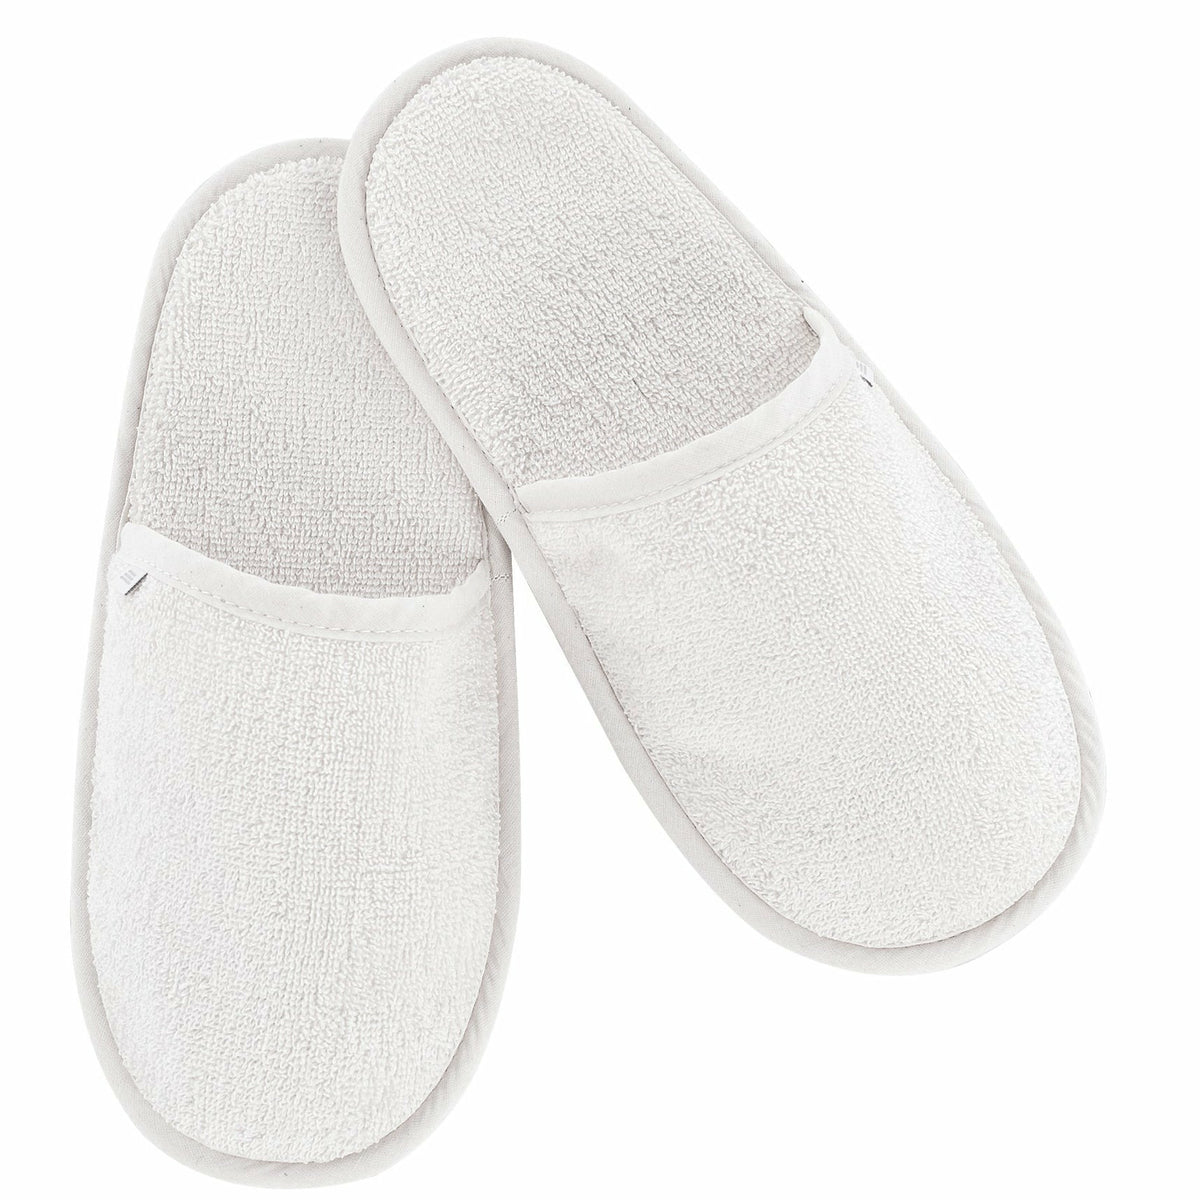 Abyss Spa Bath Robes and Slippers Top White